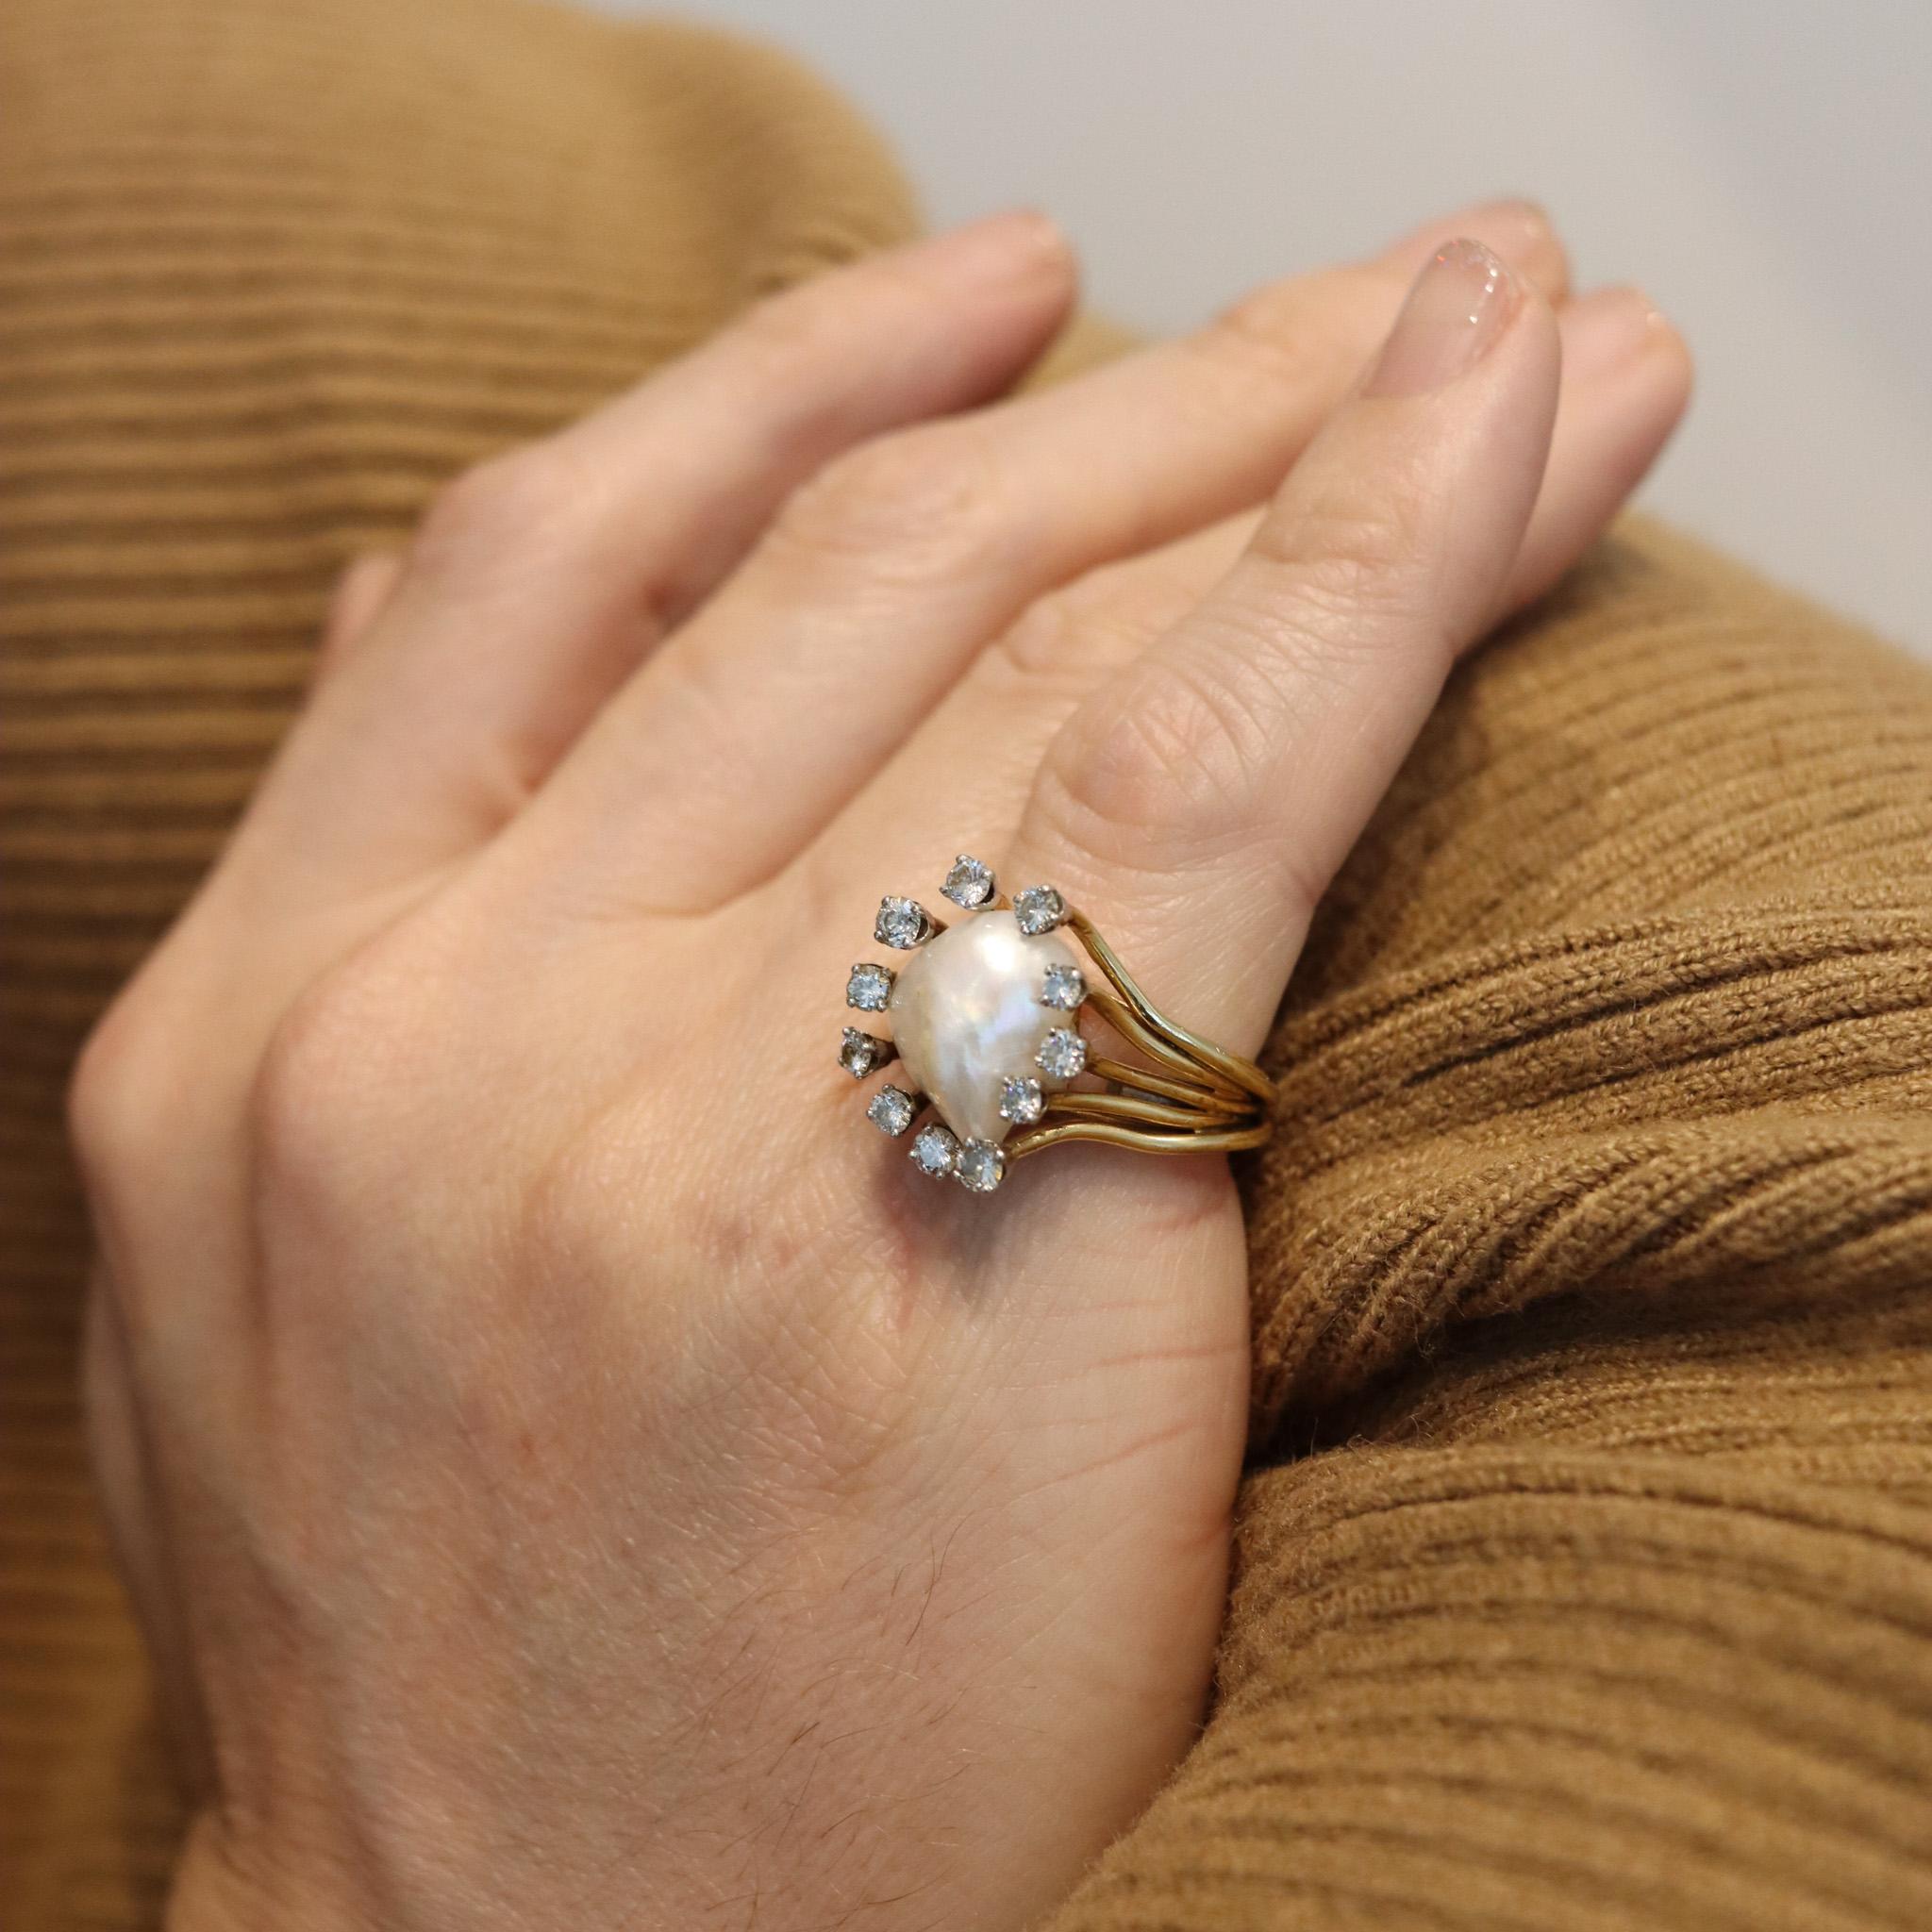 Cocktail ring with natural pearl designed by William Ruser.

Beautiful cocktail ring, created in Beverly Hill California back in the 1950 by the jewelry designer William Ruser, back in the 1950. This ring is rare and has been crafted with a free